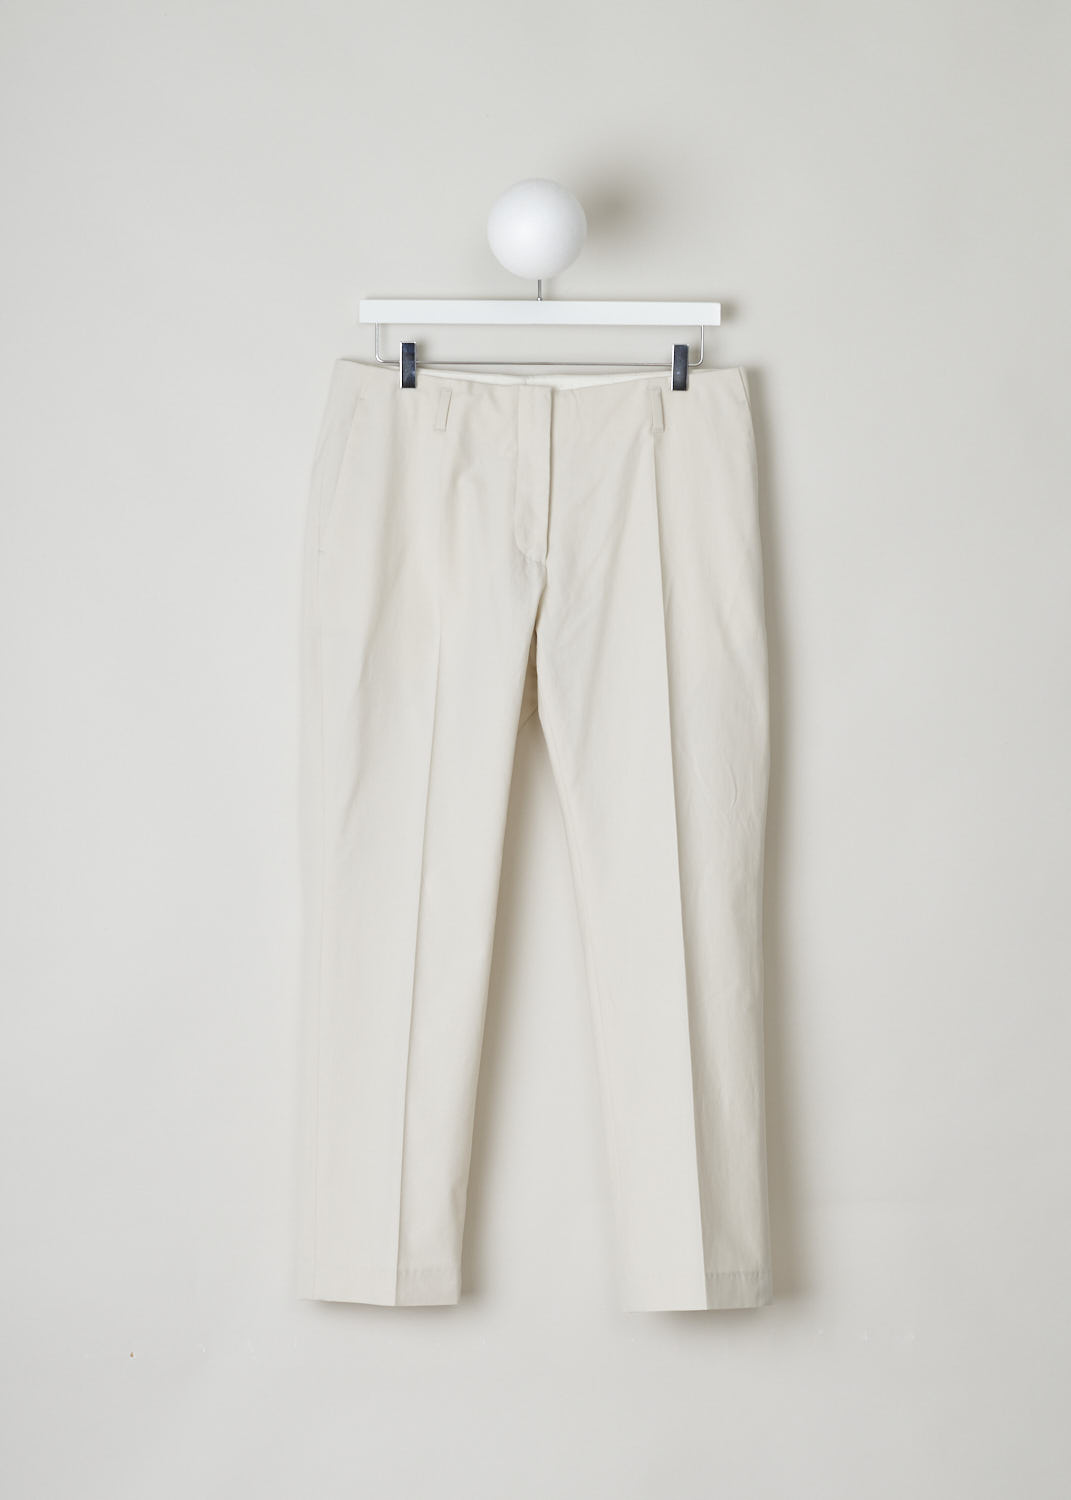 DRIES VAN NOTEN,ECRU PANTS WITH FRONT PLEATS, PAOLA_9022_WW_PANTS_ECR, Beige Front, These ecru trousers don's have an obvious waistband. Across the waist, belt loops can be found. It comes with a zip and clasp closure. Additionally these trousers have two side slit pockets in the front and two welt pockets in the back. 
